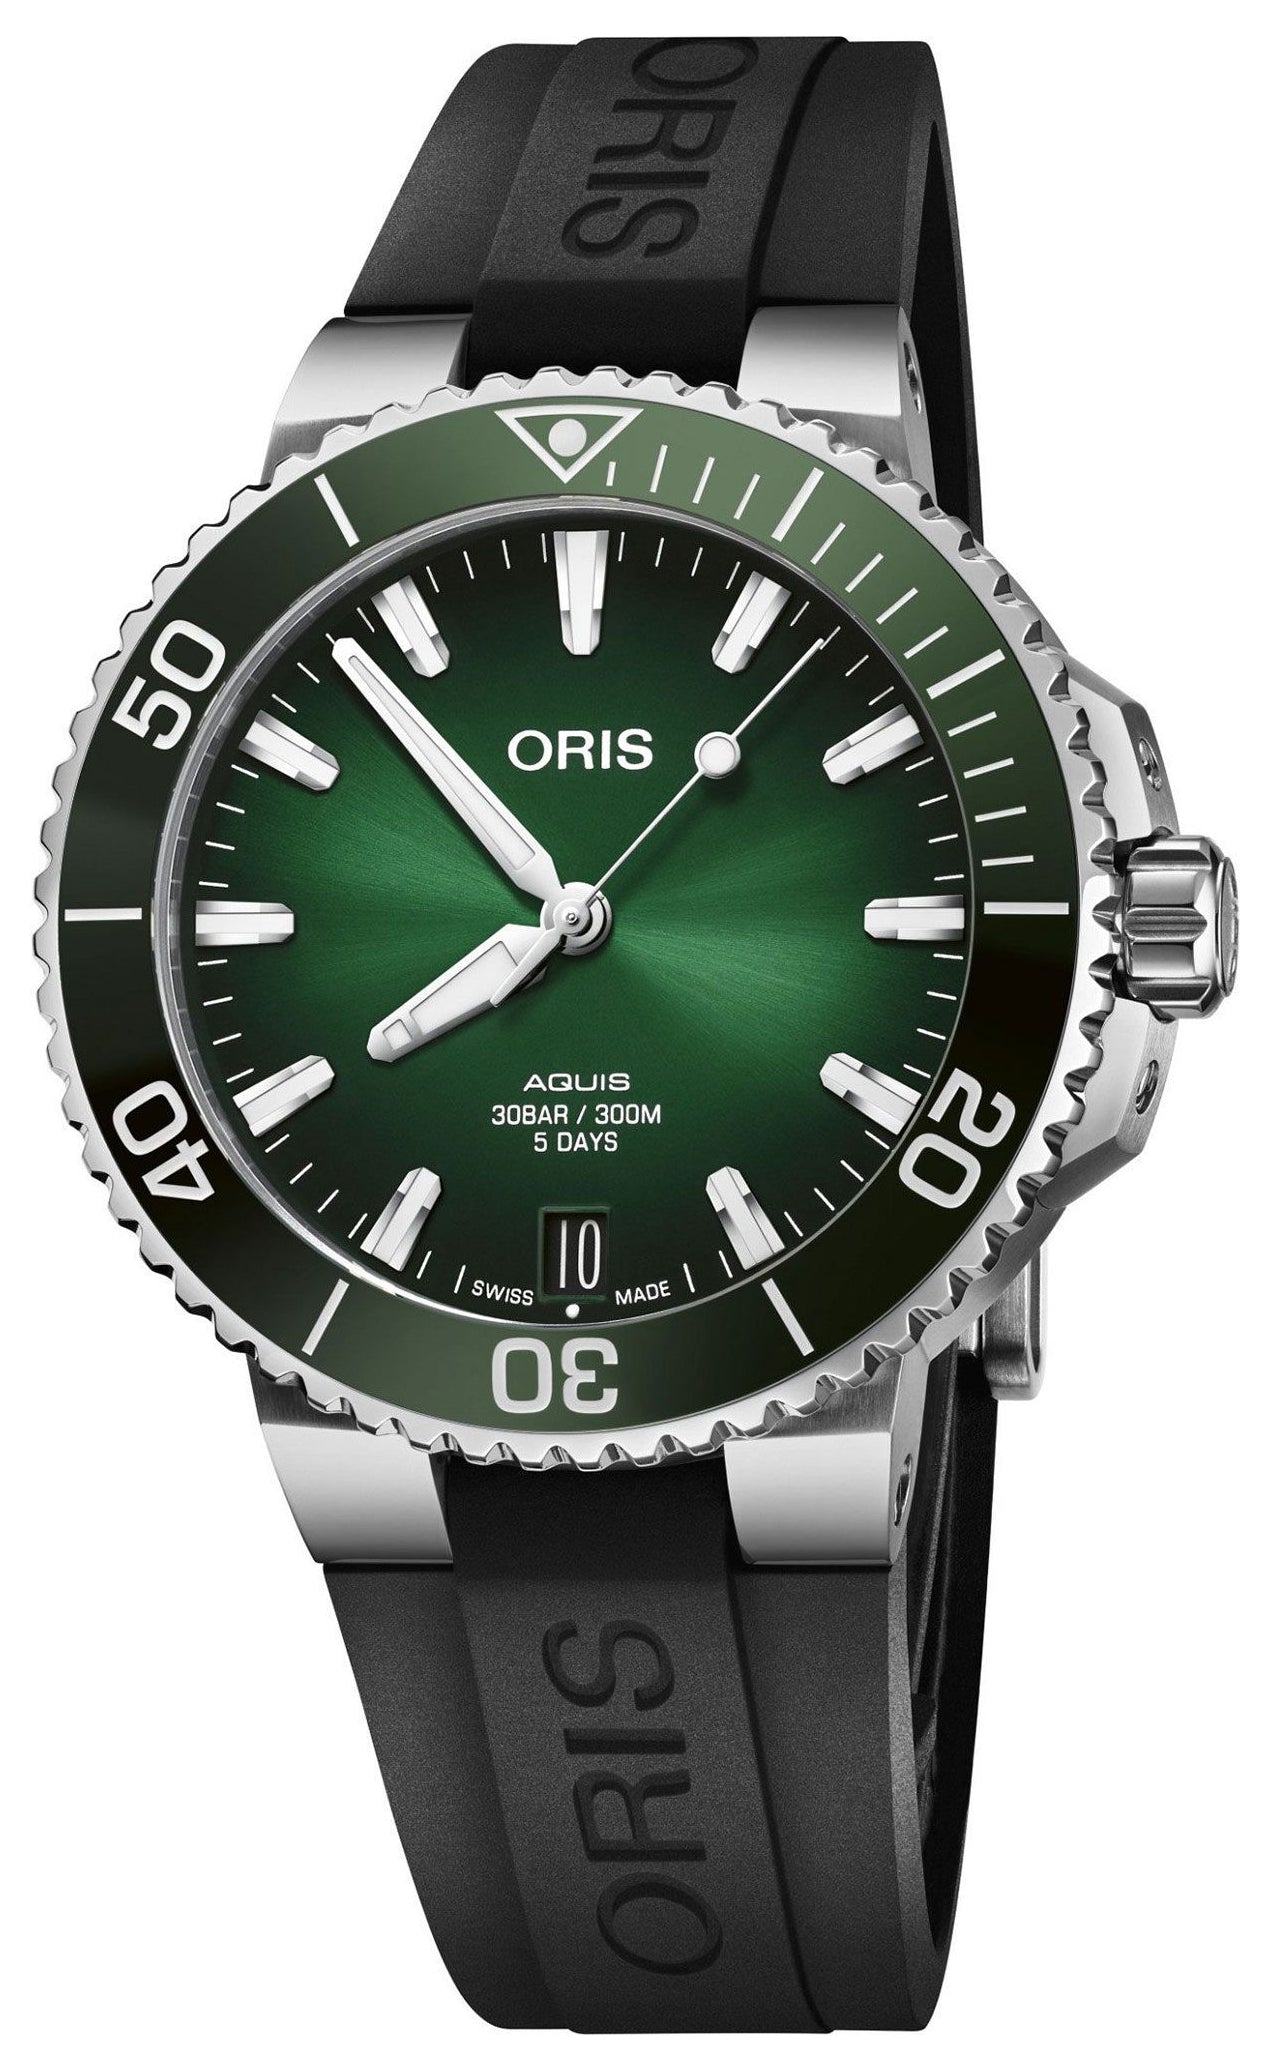 update alt-text with template Watches - Mens-Oris-400 7769 4157-RS-40 - 45 mm, Aquis, date, divers, green, mens, menswatches, new arrivals, Oris, round, rpSKU_400 7763 4135-RS, rpSKU_400 7769 4135-RS, rpSKU_400 7769 4154-MB, rpSKU_400 7769 4154-RS, rpSKU_400 7769 4157-MB, rubber, stainless steel case, swiss automatic, uni-directional rotating bezel, watches-Watches & Beyond